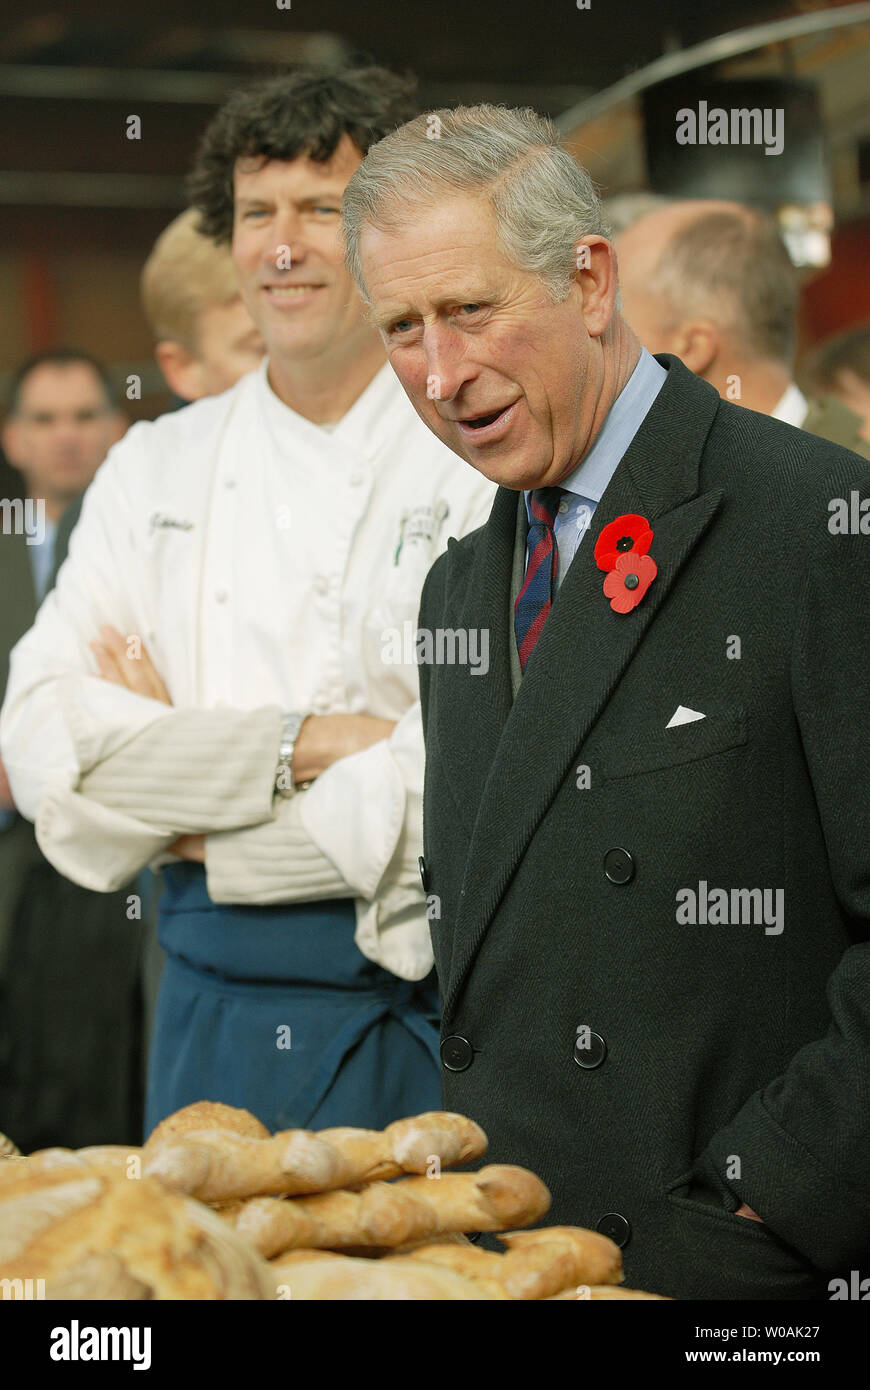 Britain's Prince Charles (R), escorted by chef Jamie Kennedy, speaks to food vendors as he tours the Harvest Market at the Heritage Brick Factory Building in Toronto, Canada on November 6, 2009.  The Prince and his wife Camilla, Duchess of Cornwall, are on an 11-day tour of Canada.  UPI /Christine Chew Stock Photo